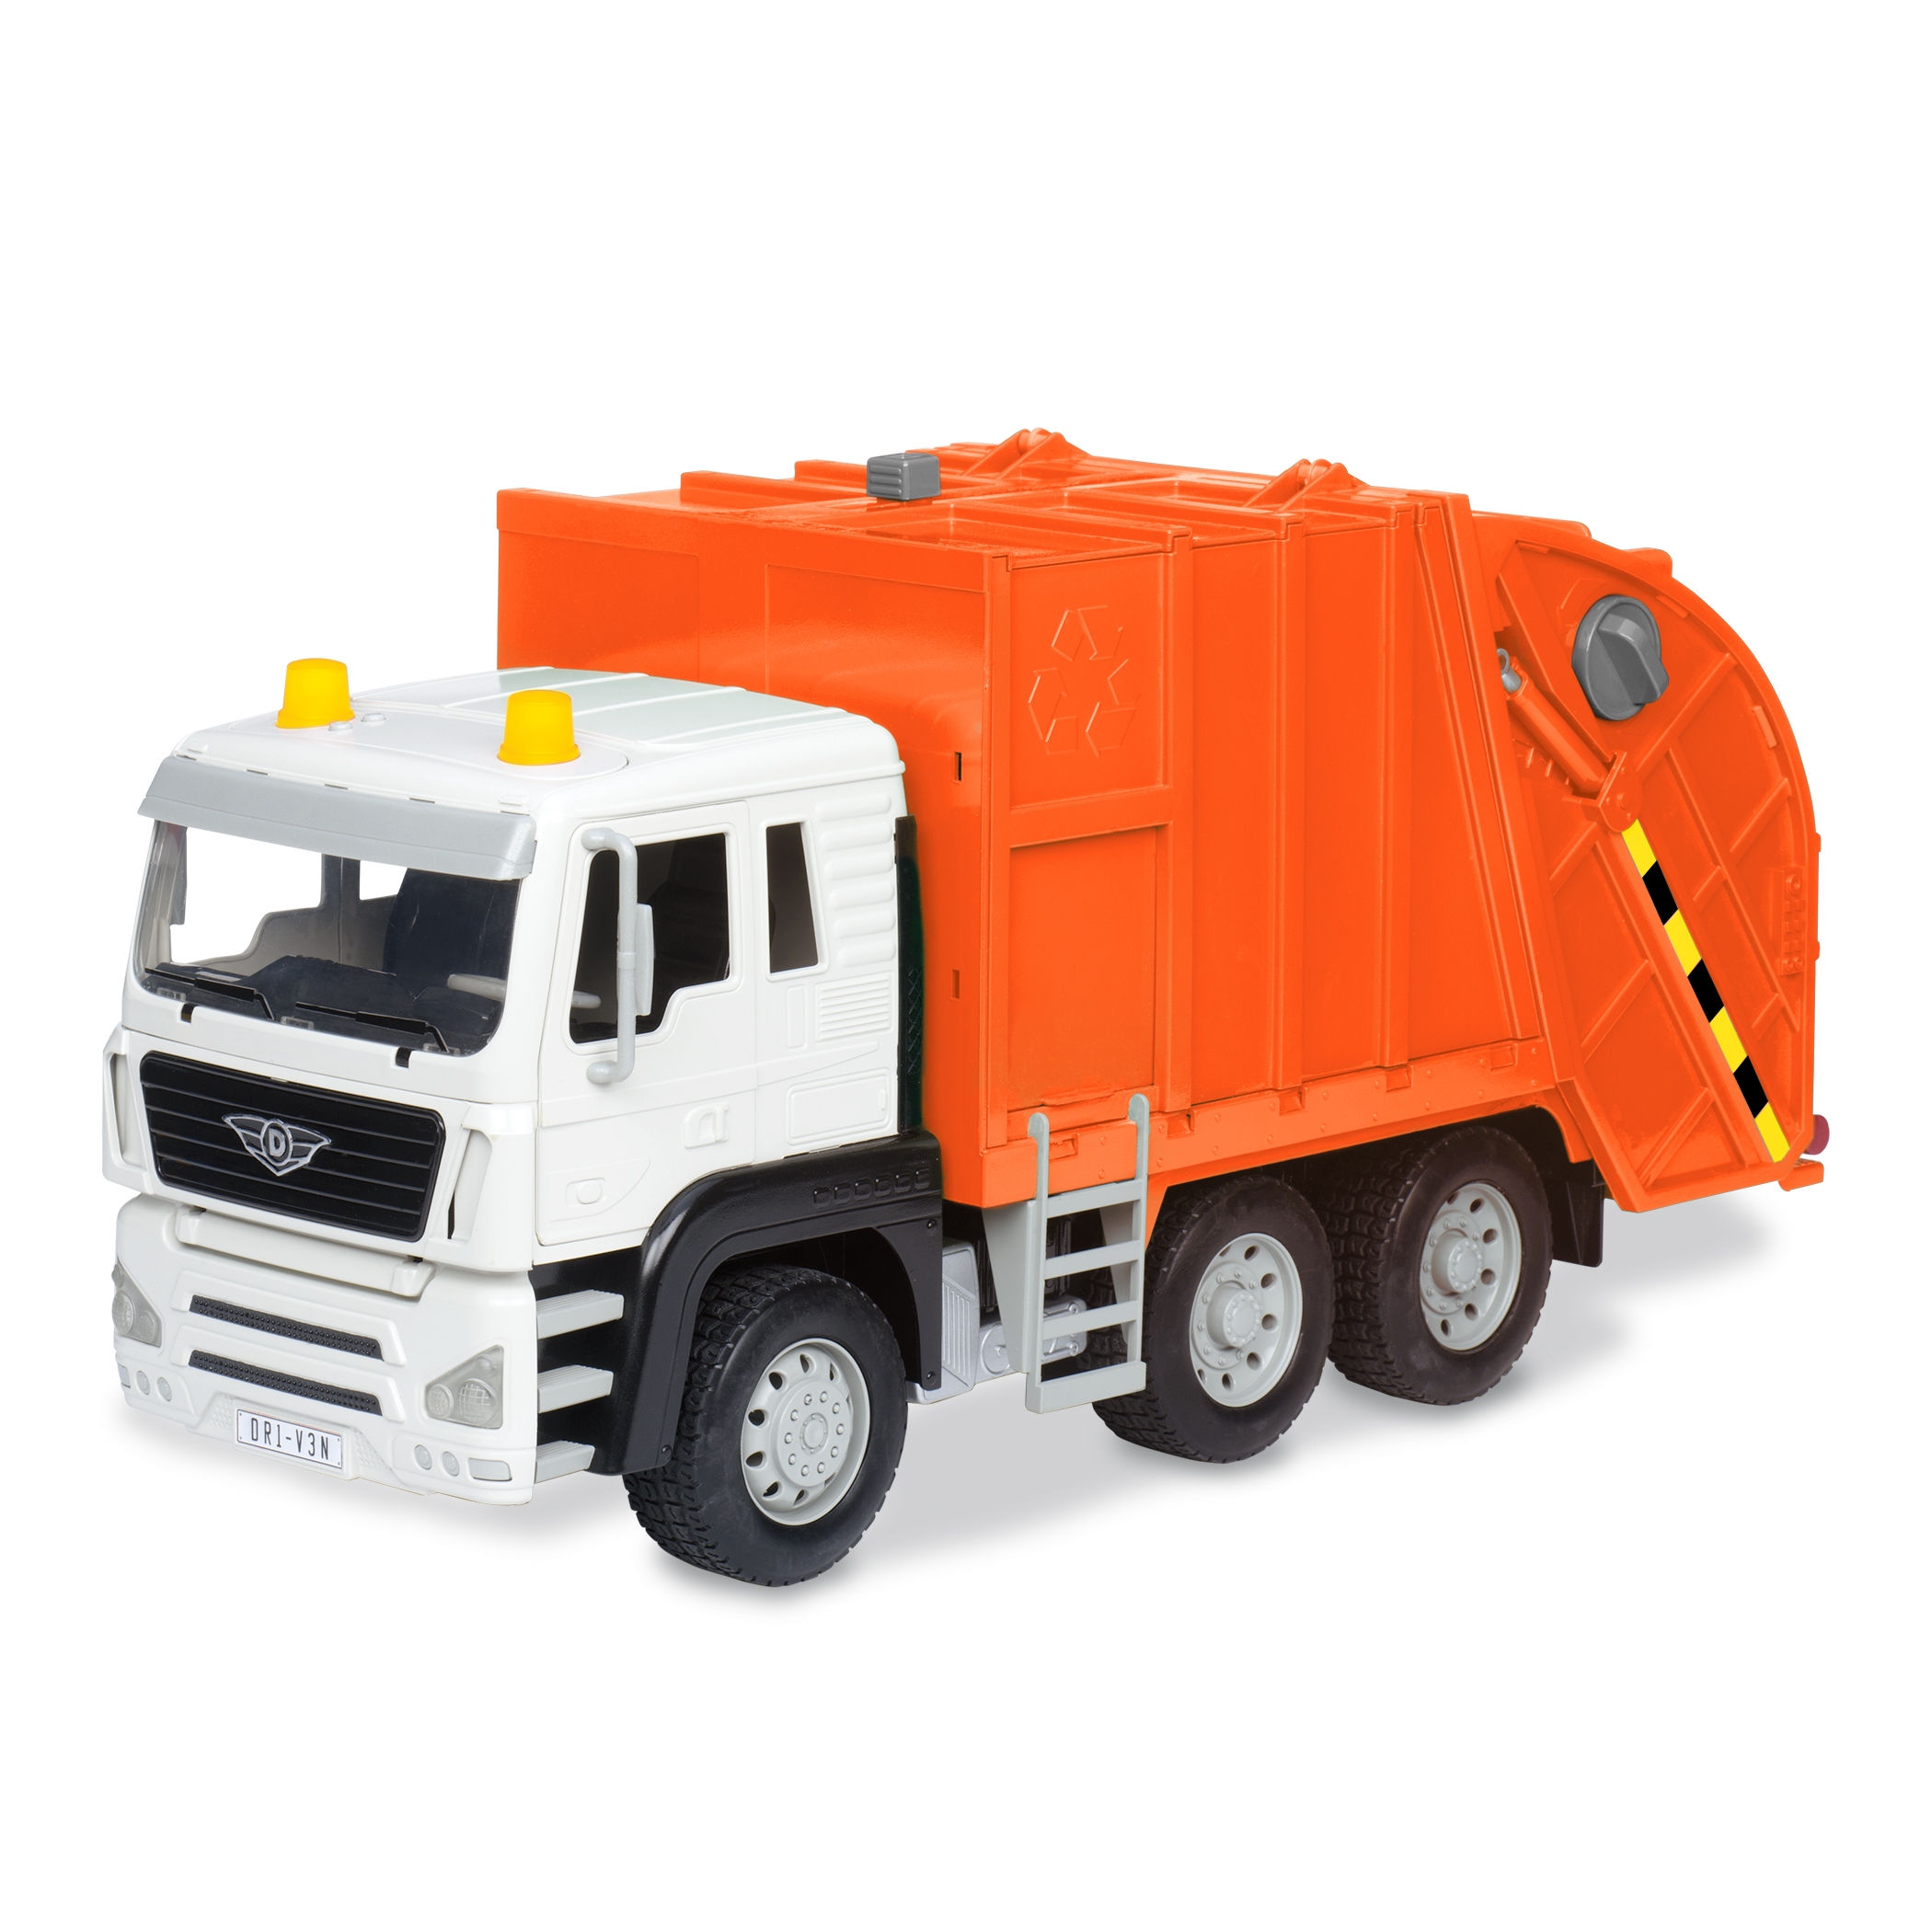 Multi-Colour 1 Driven 70.1003Z Battat Recycling Truck Vehicle Toy 16 Scale 